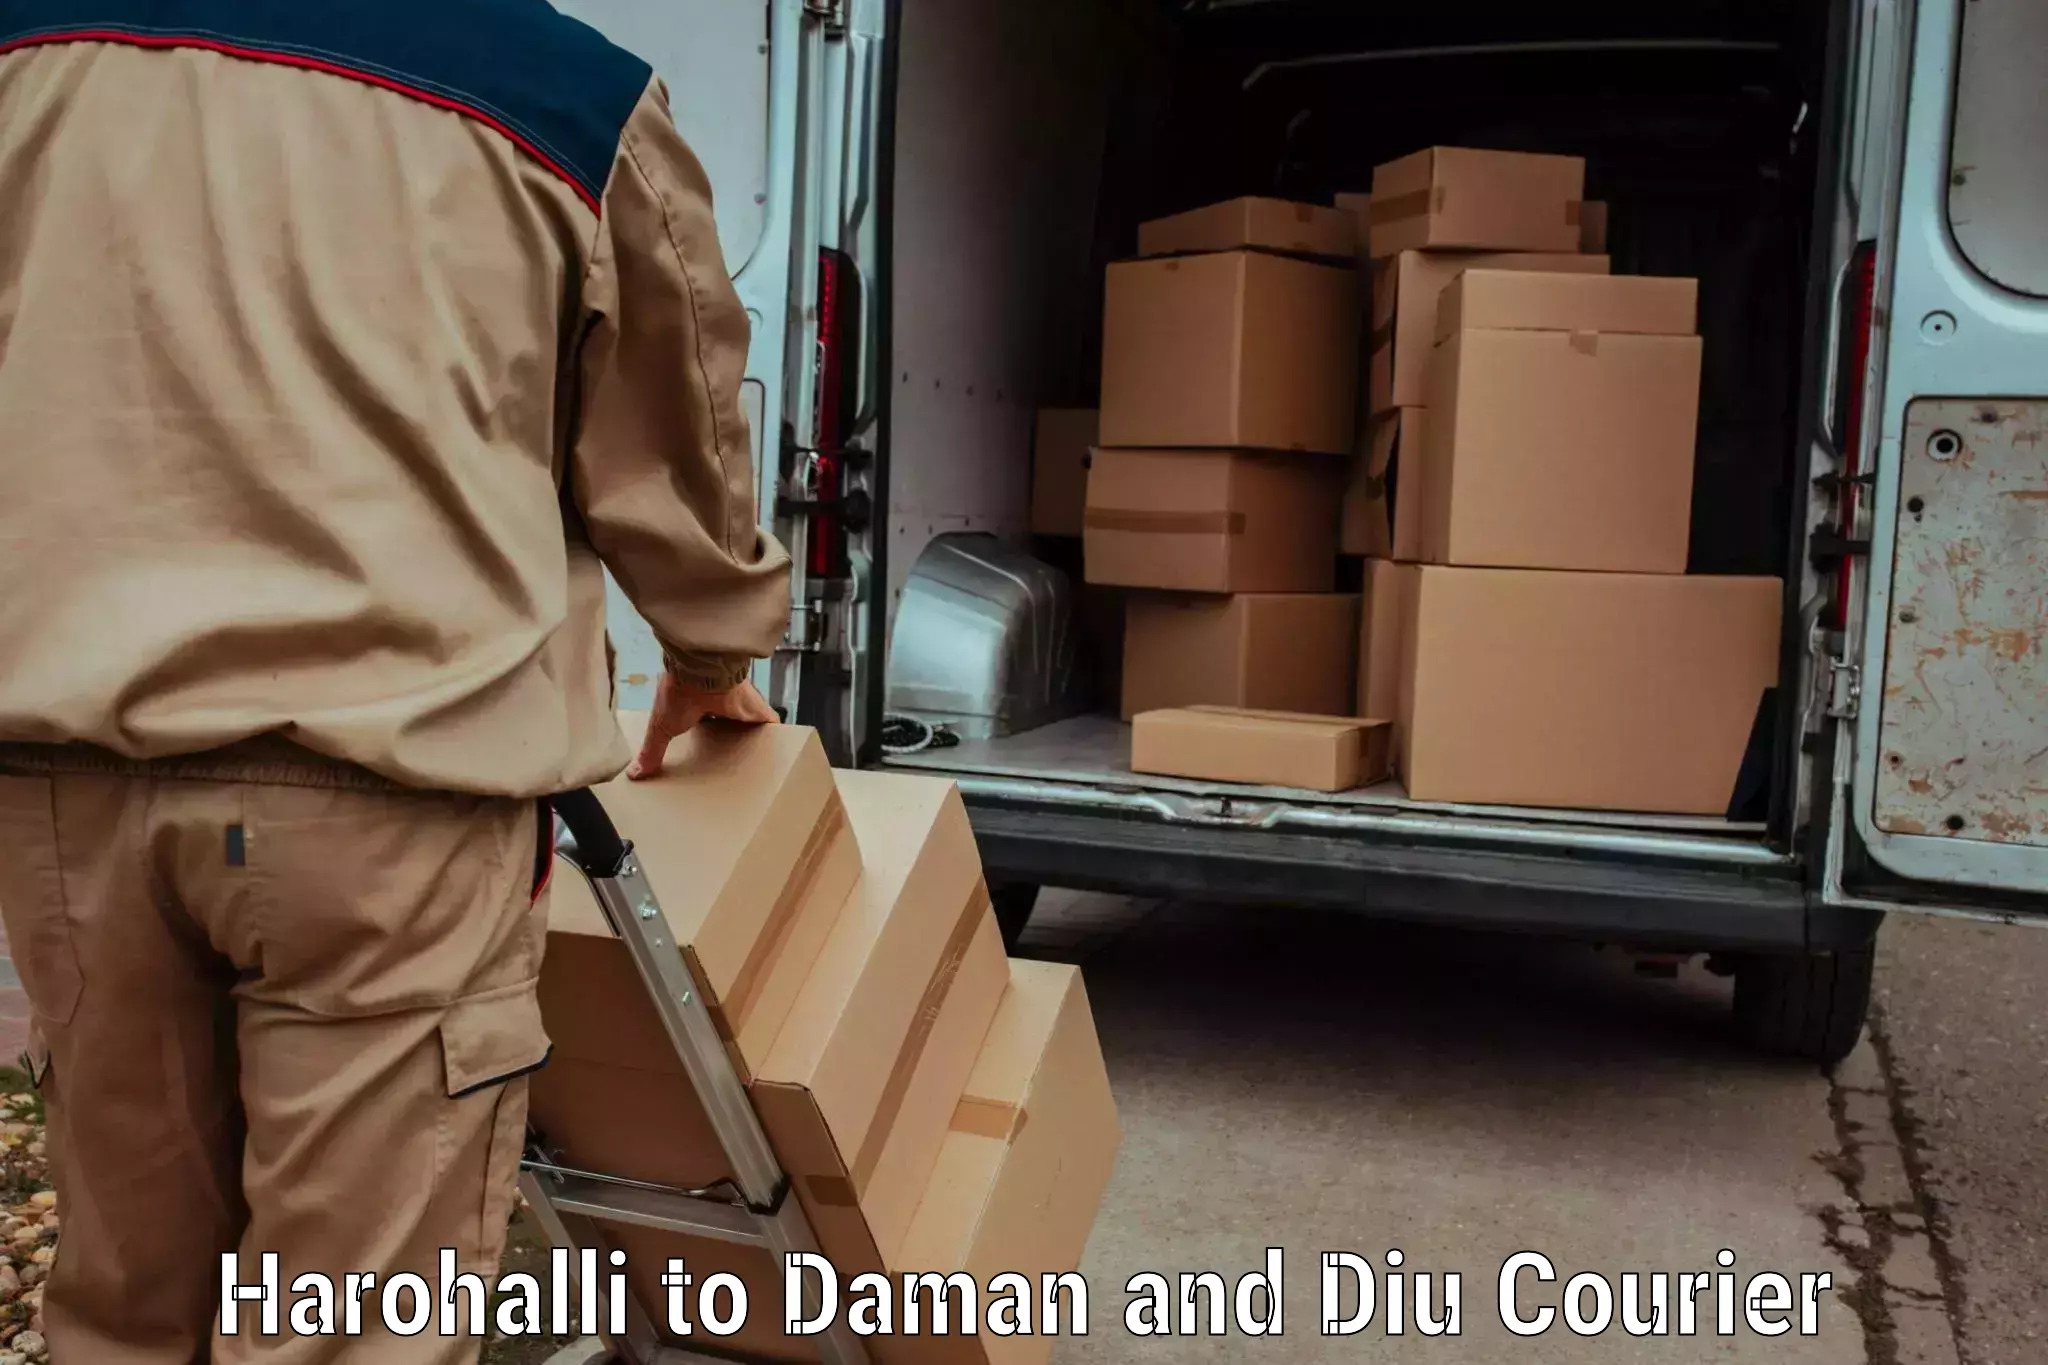 Express luggage delivery in Harohalli to Daman and Diu